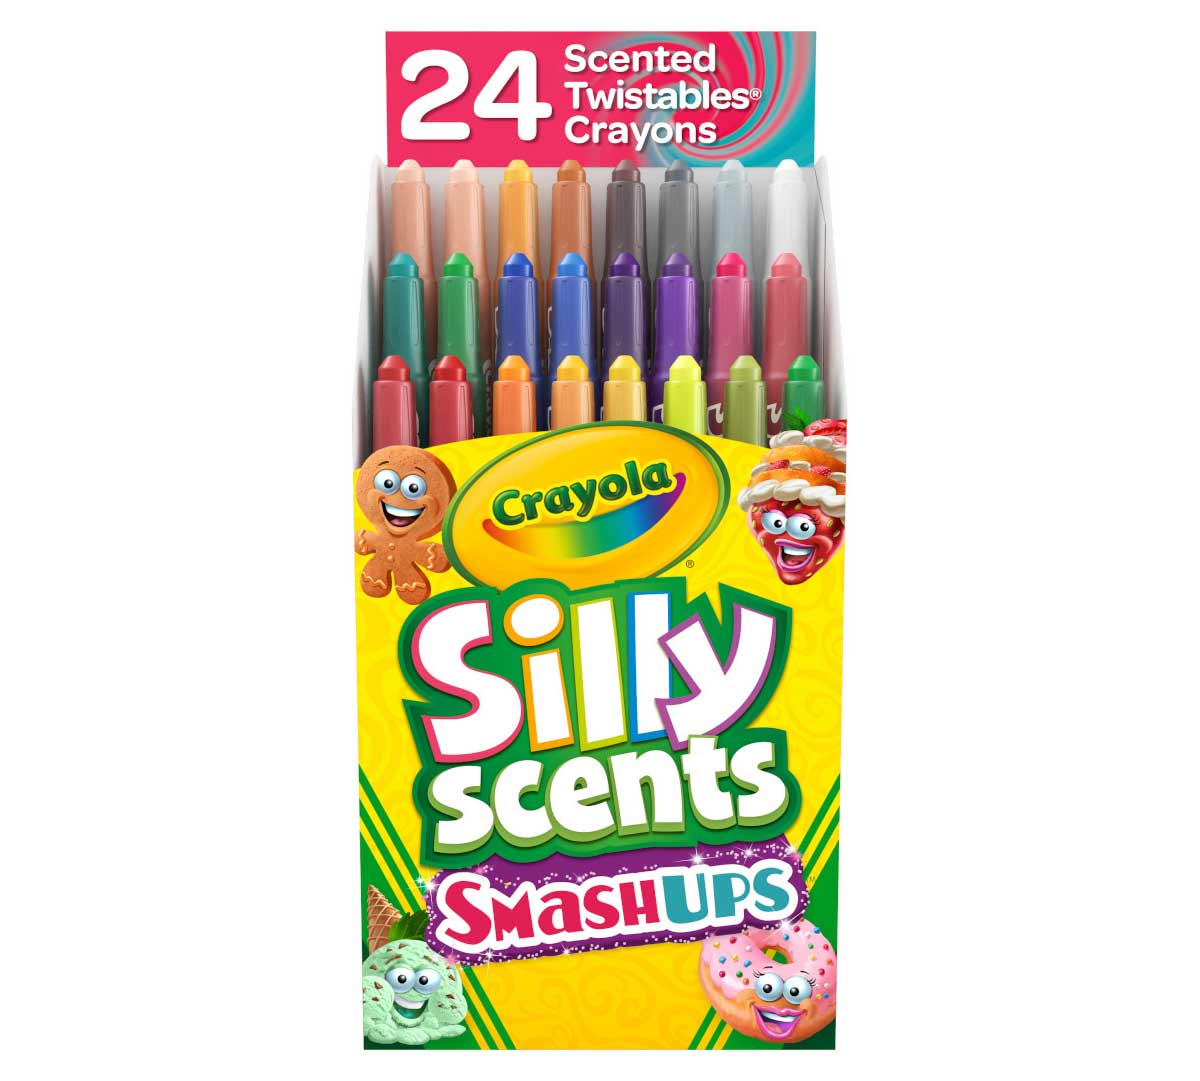 Crayola Silly Scents Smash-Ups Mini Twistables Crayons Pack of 24